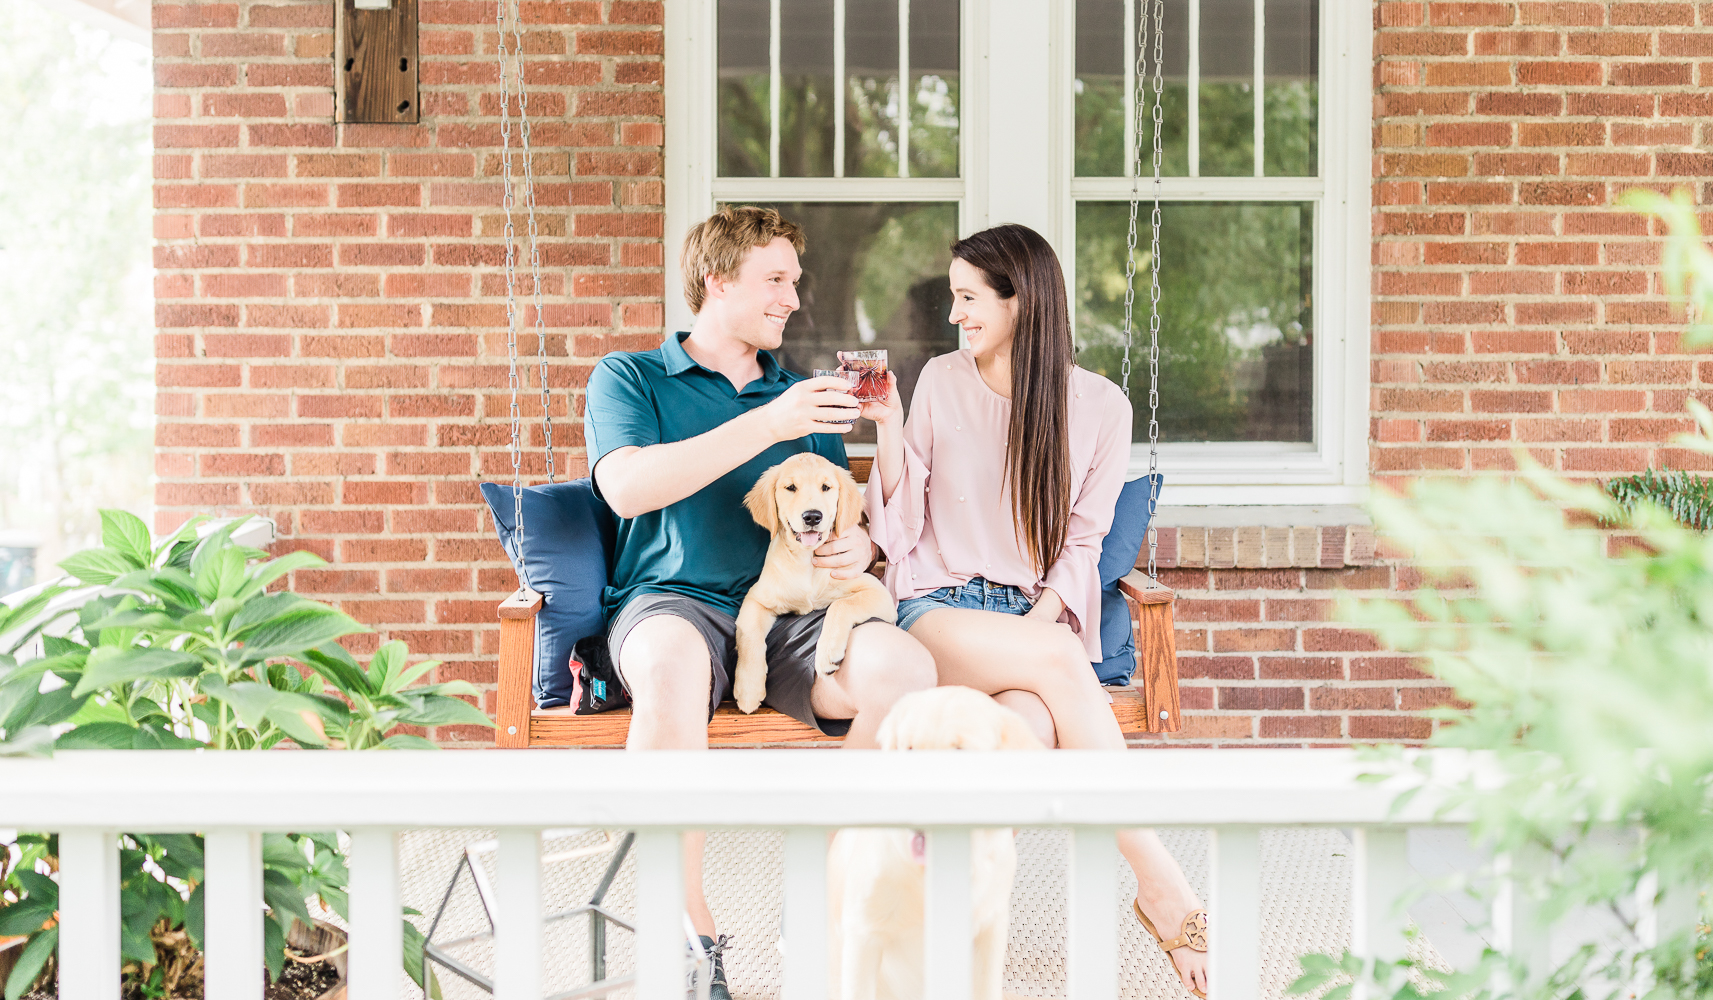 How to Make a Rental Feel Like Home: 5 Easy Decorating Tips for Renters from southern lifestyle blogger Stephanie Ziajka from Diary of a Debutante, front porch decor ideas, CORT Furniture Rental review, decorating hacks for renters